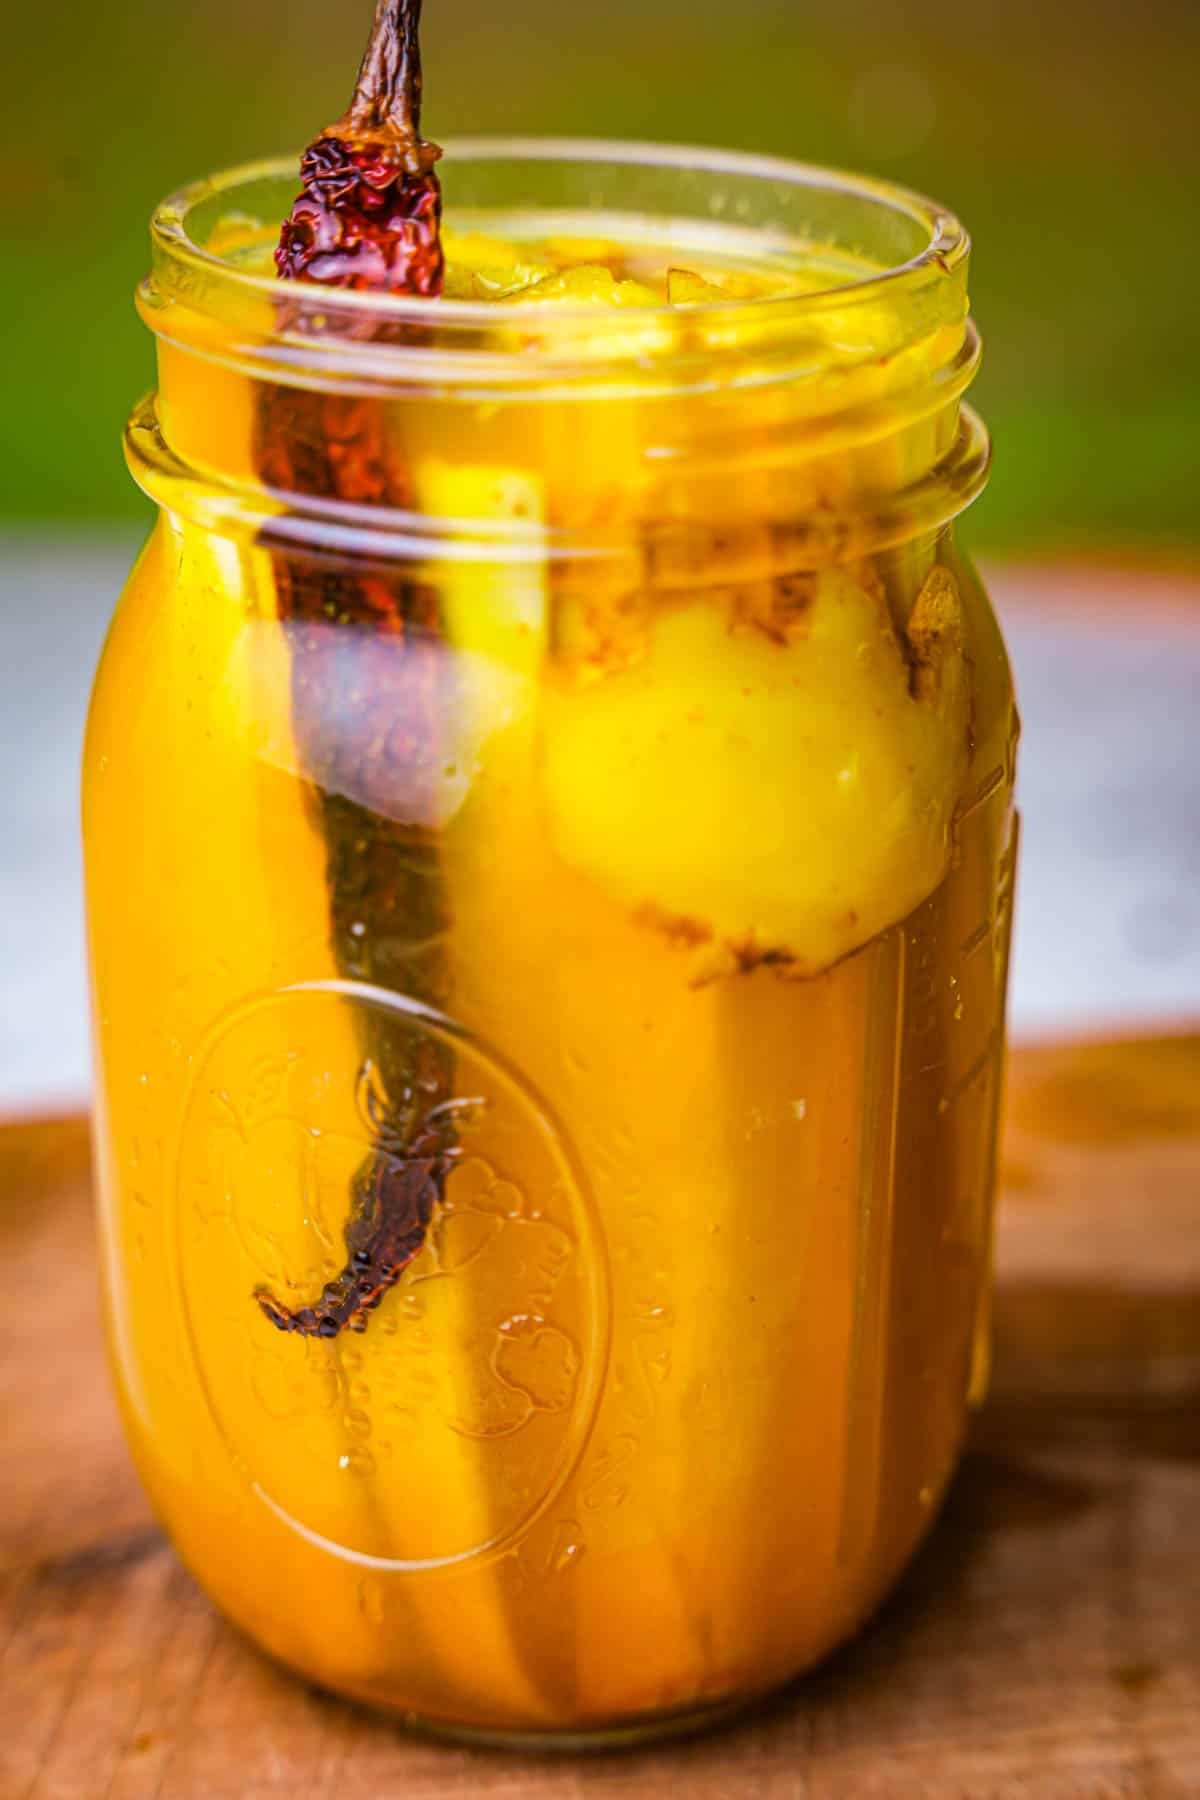 Chili and ginger slices are added to the jar with burdock strips.